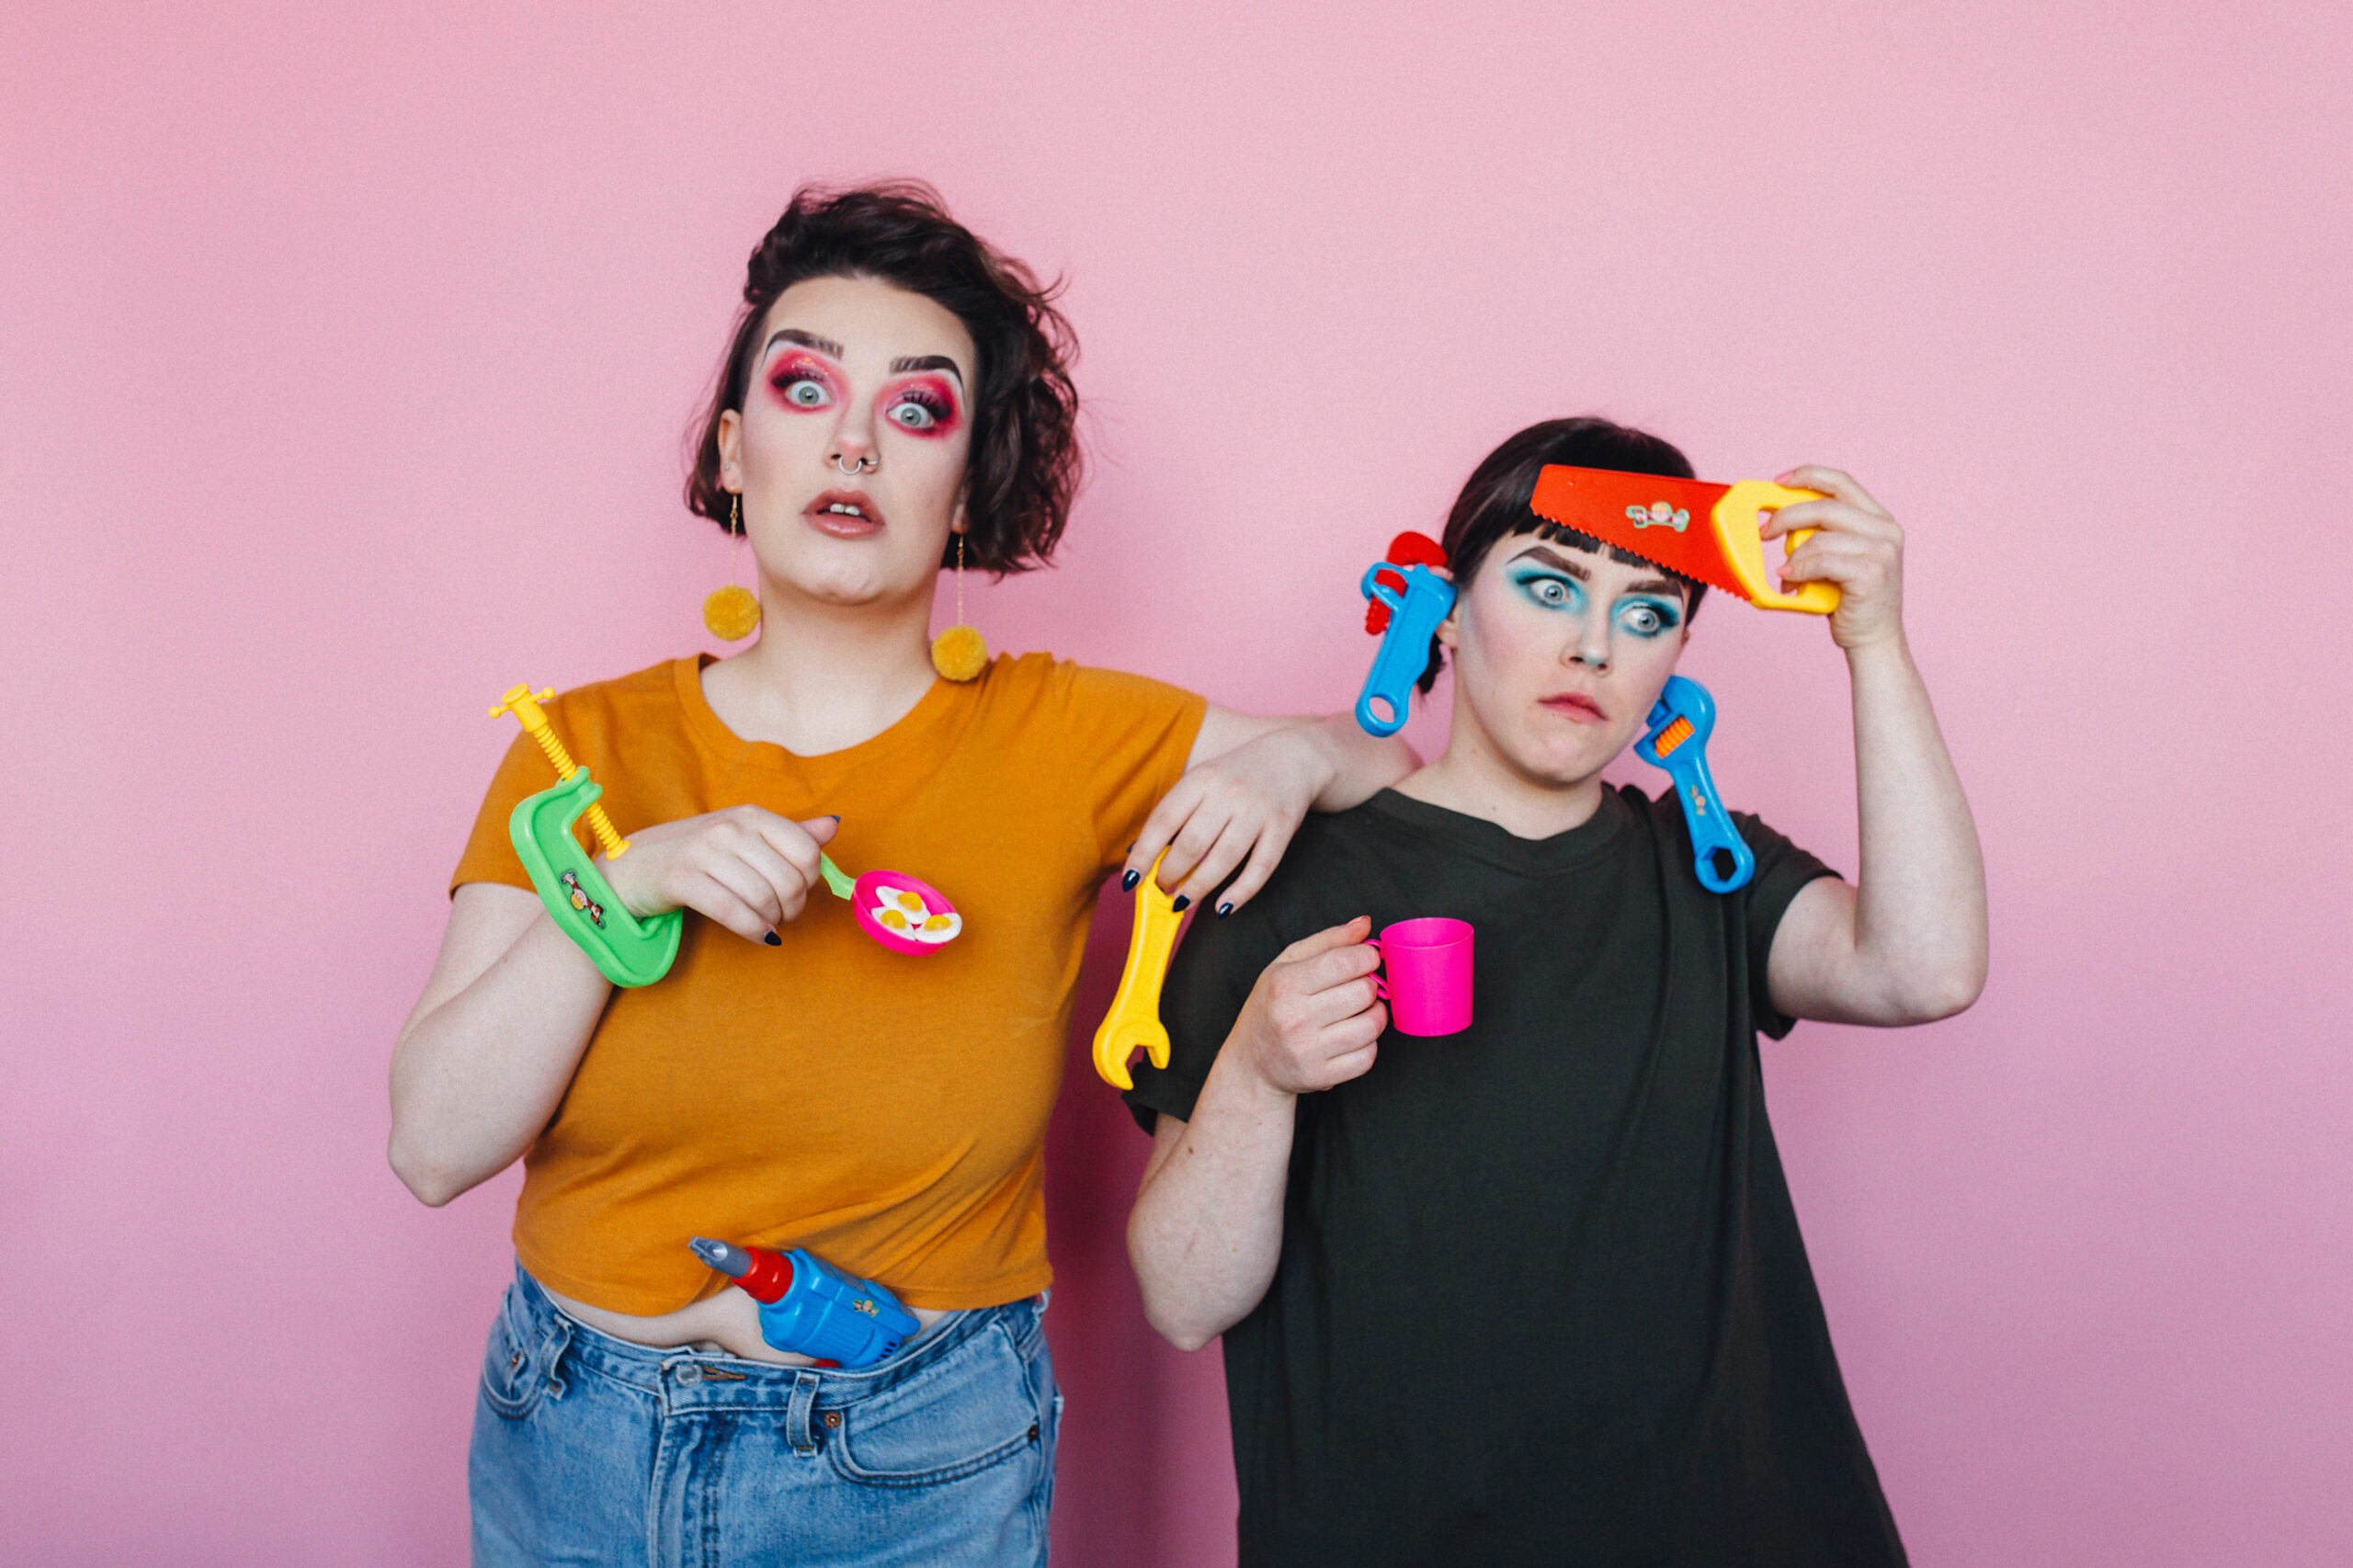 Two individuals standing against a pink background armed with various children’s toy construction tools. They wear shocked and confused facial expressions and blue and pink eyeshadow.